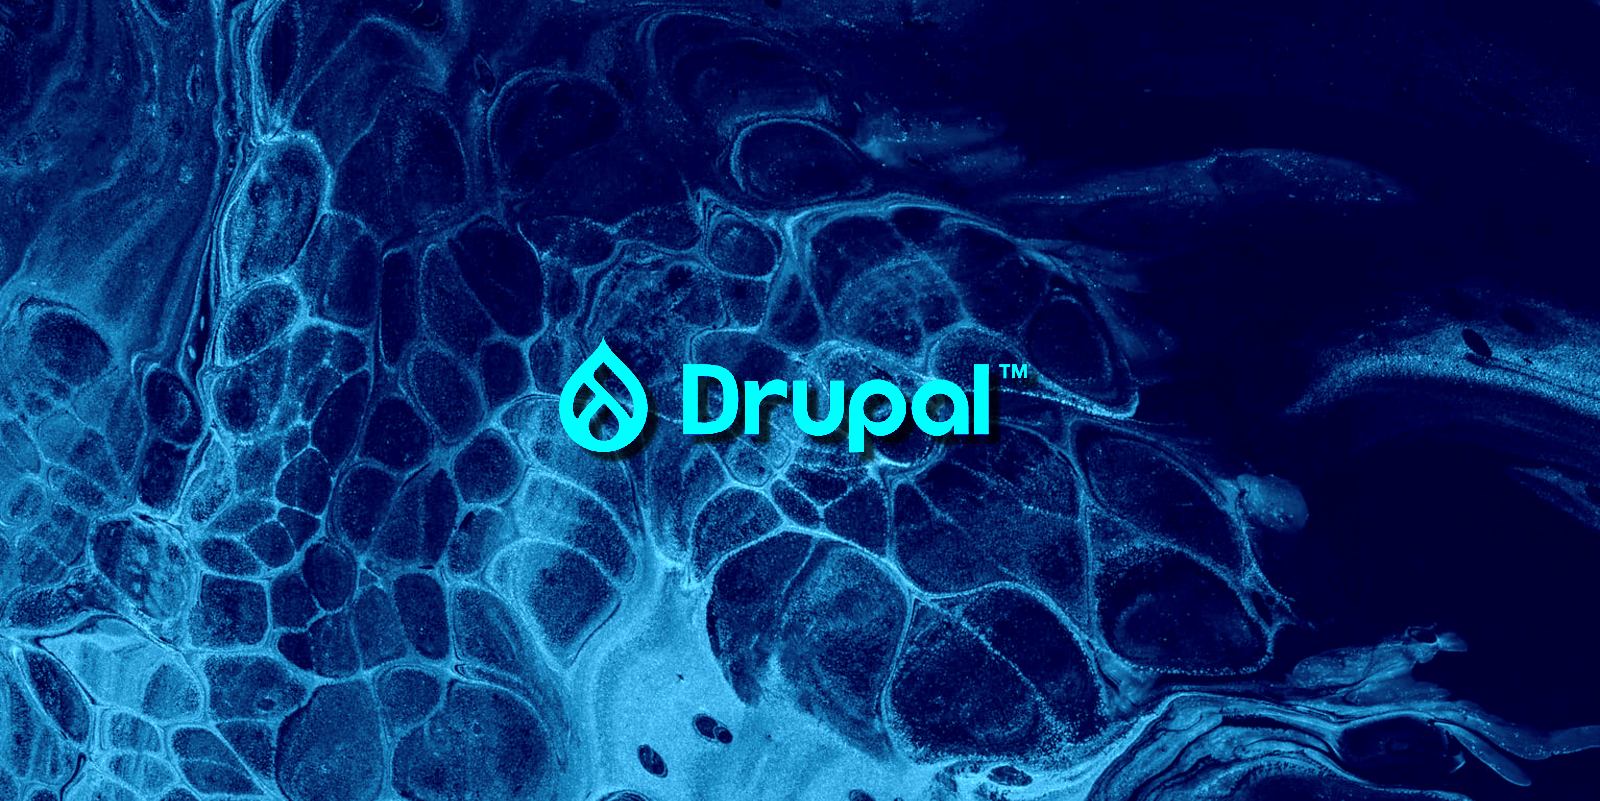 Drupal releases fix for critical vulnerability with known exploits